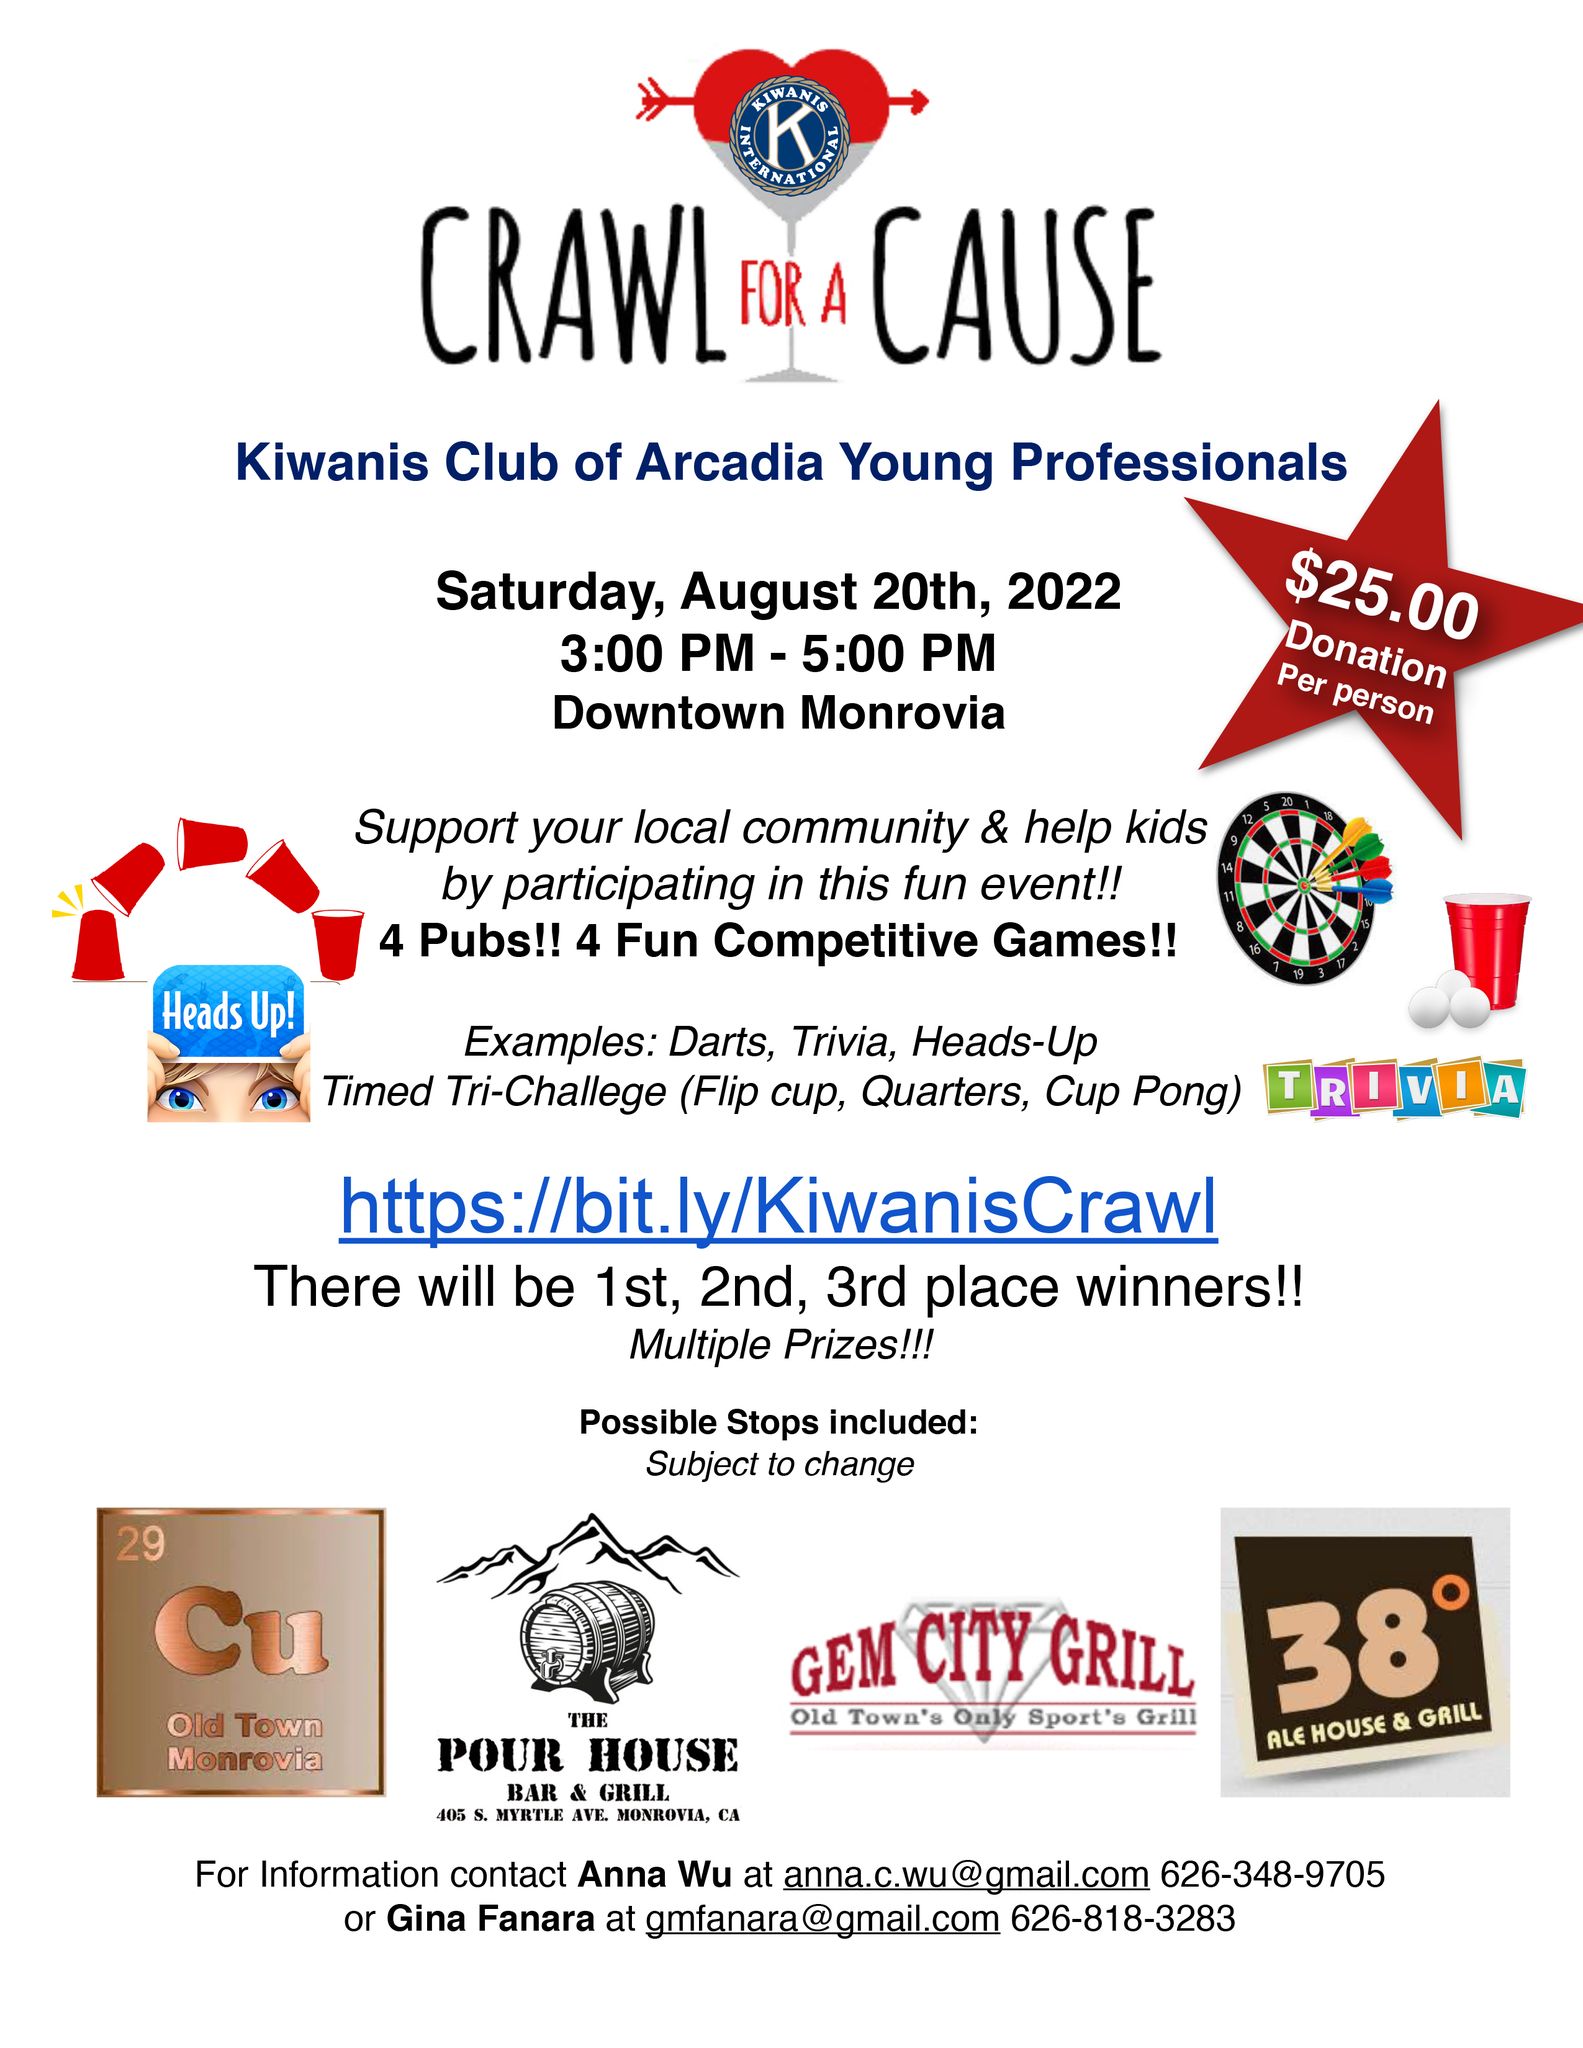 Kiwanis Crawl for a Cause event flyer with info